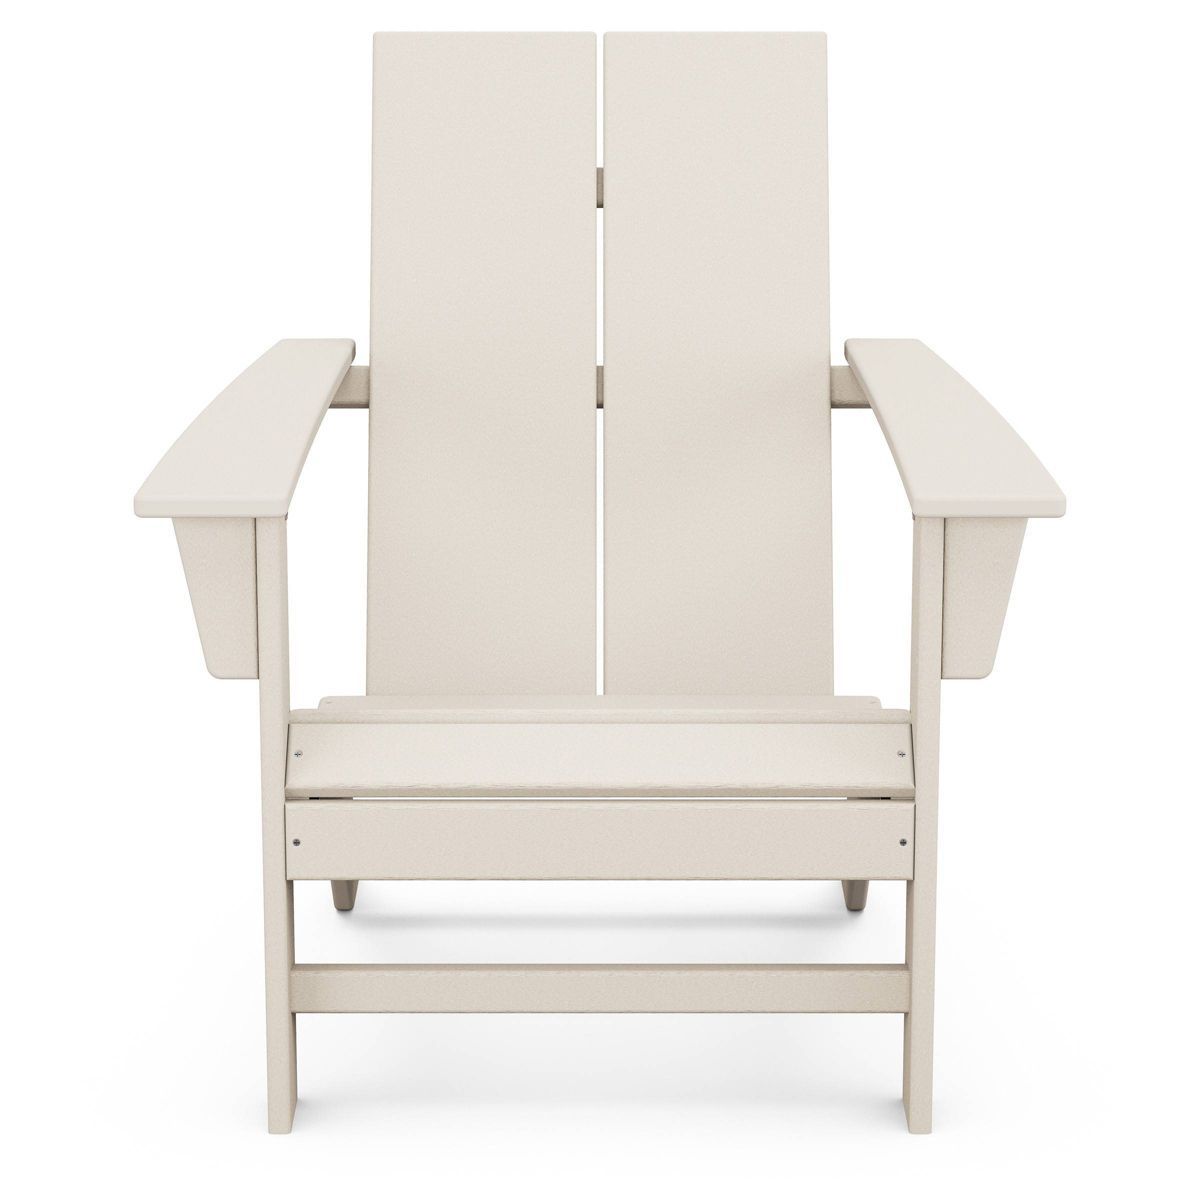 St. Croix Contemporary Adirondack Chair - POLYWOOD | Target